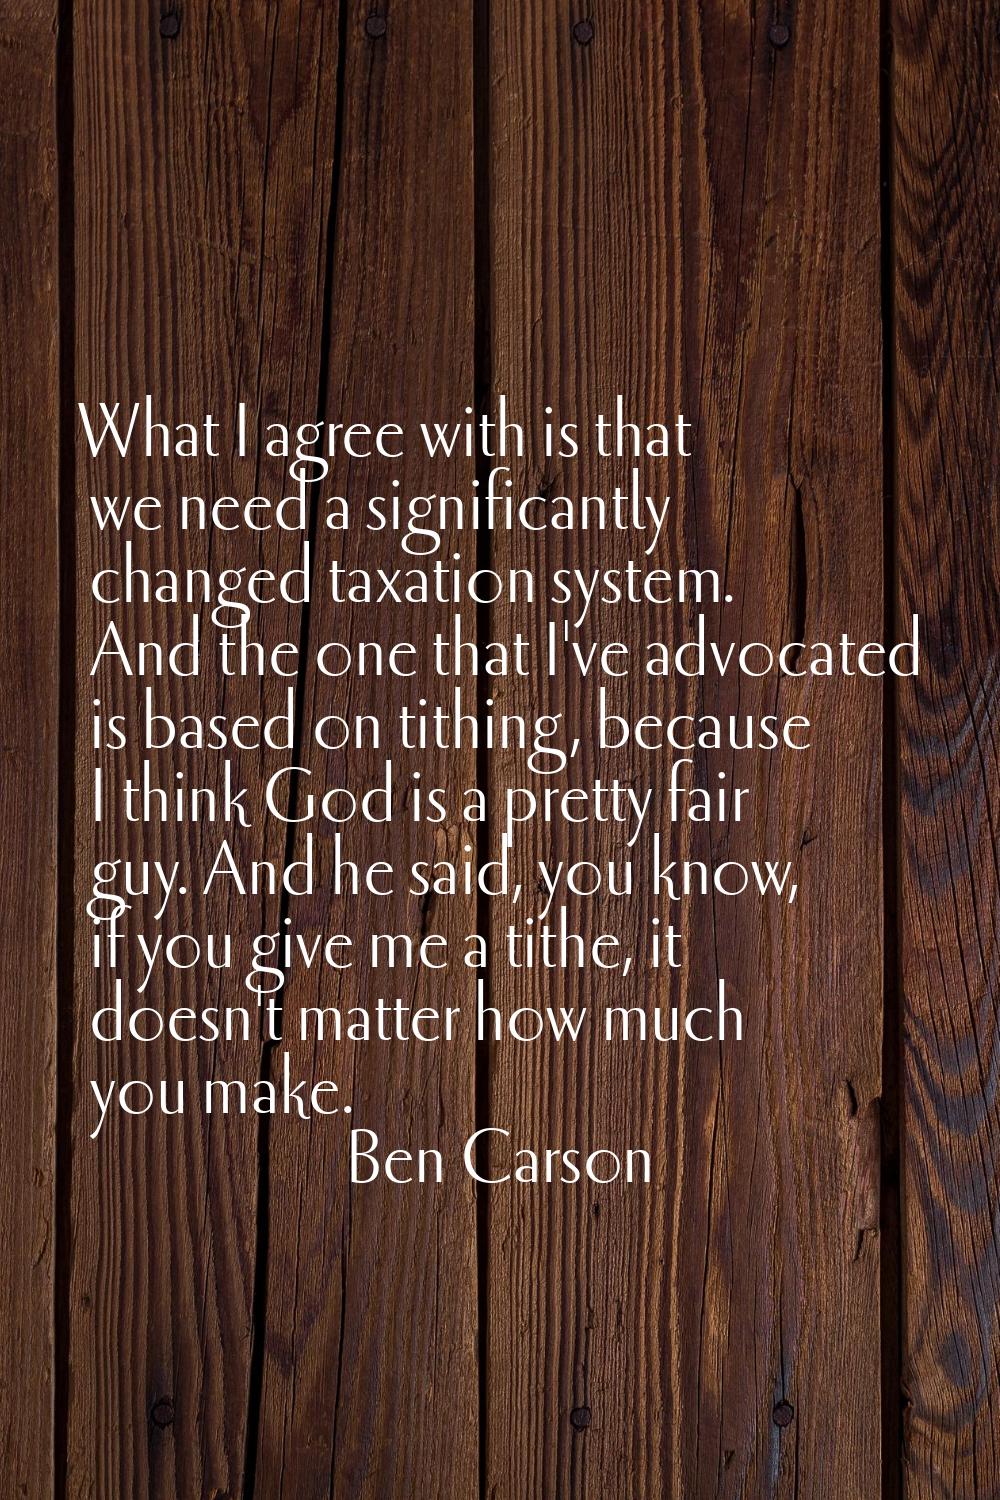 What I agree with is that we need a significantly changed taxation system. And the one that I've ad